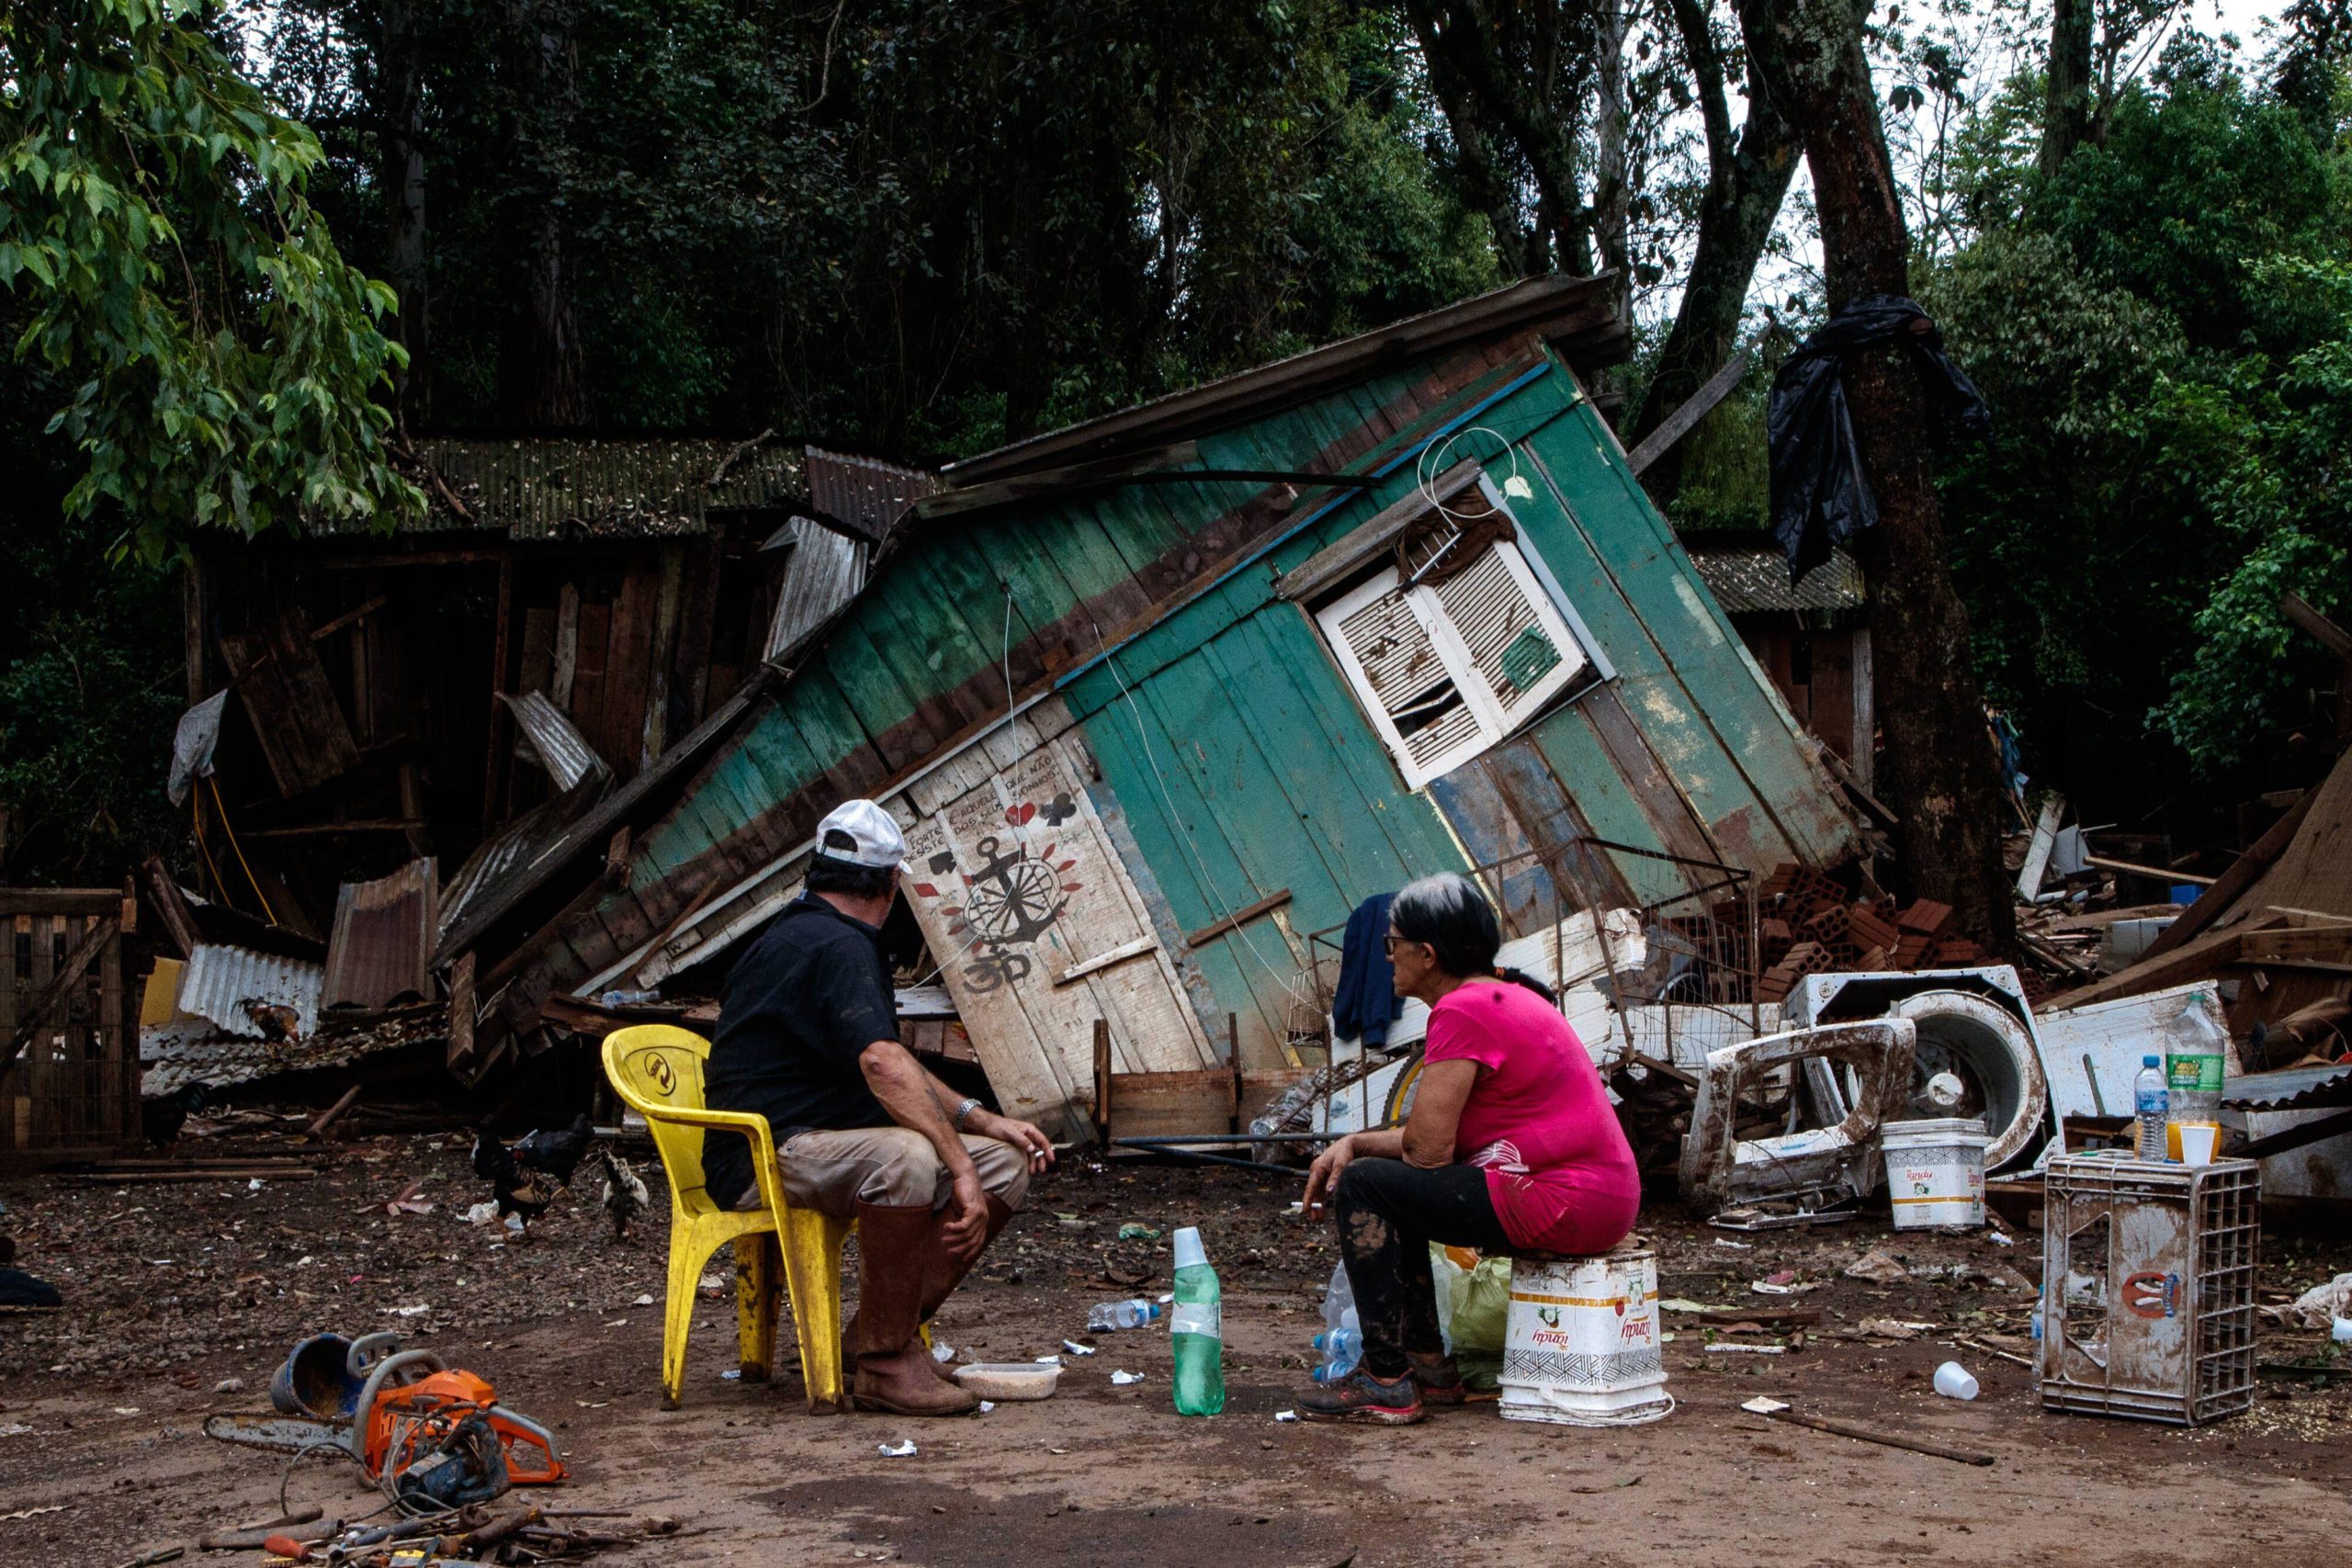 People sit in front of a cabin destroyed by floods